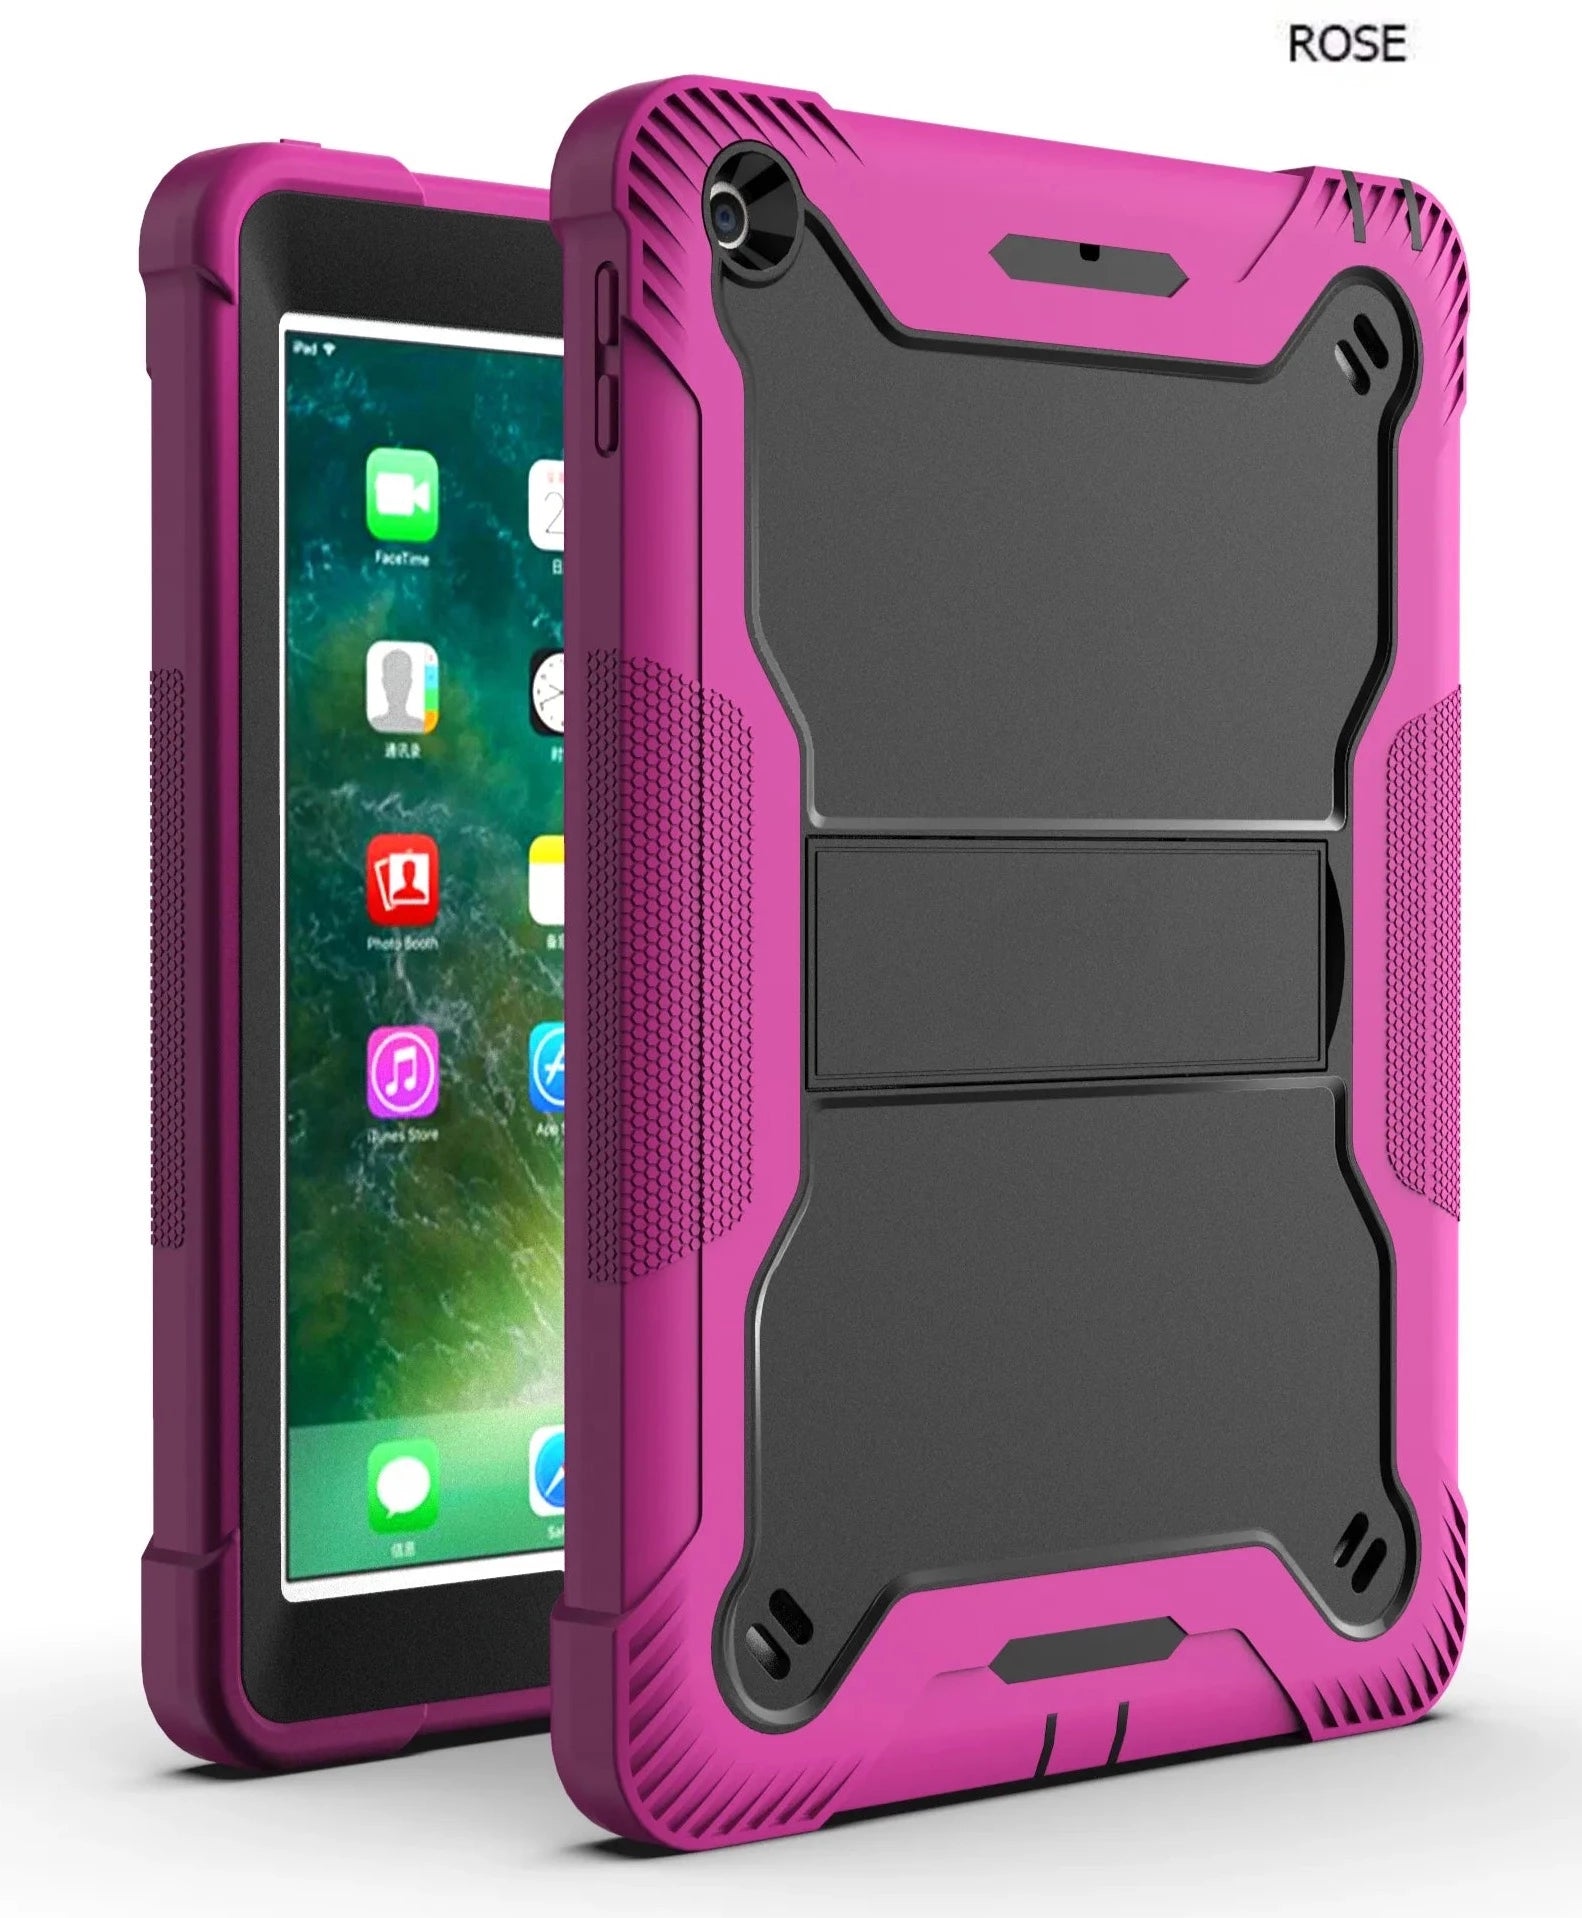 Apple iPad 5, 6, Air 2 (9.7 inch) Hot Pink Shockproof Rugged Case with Kickstand